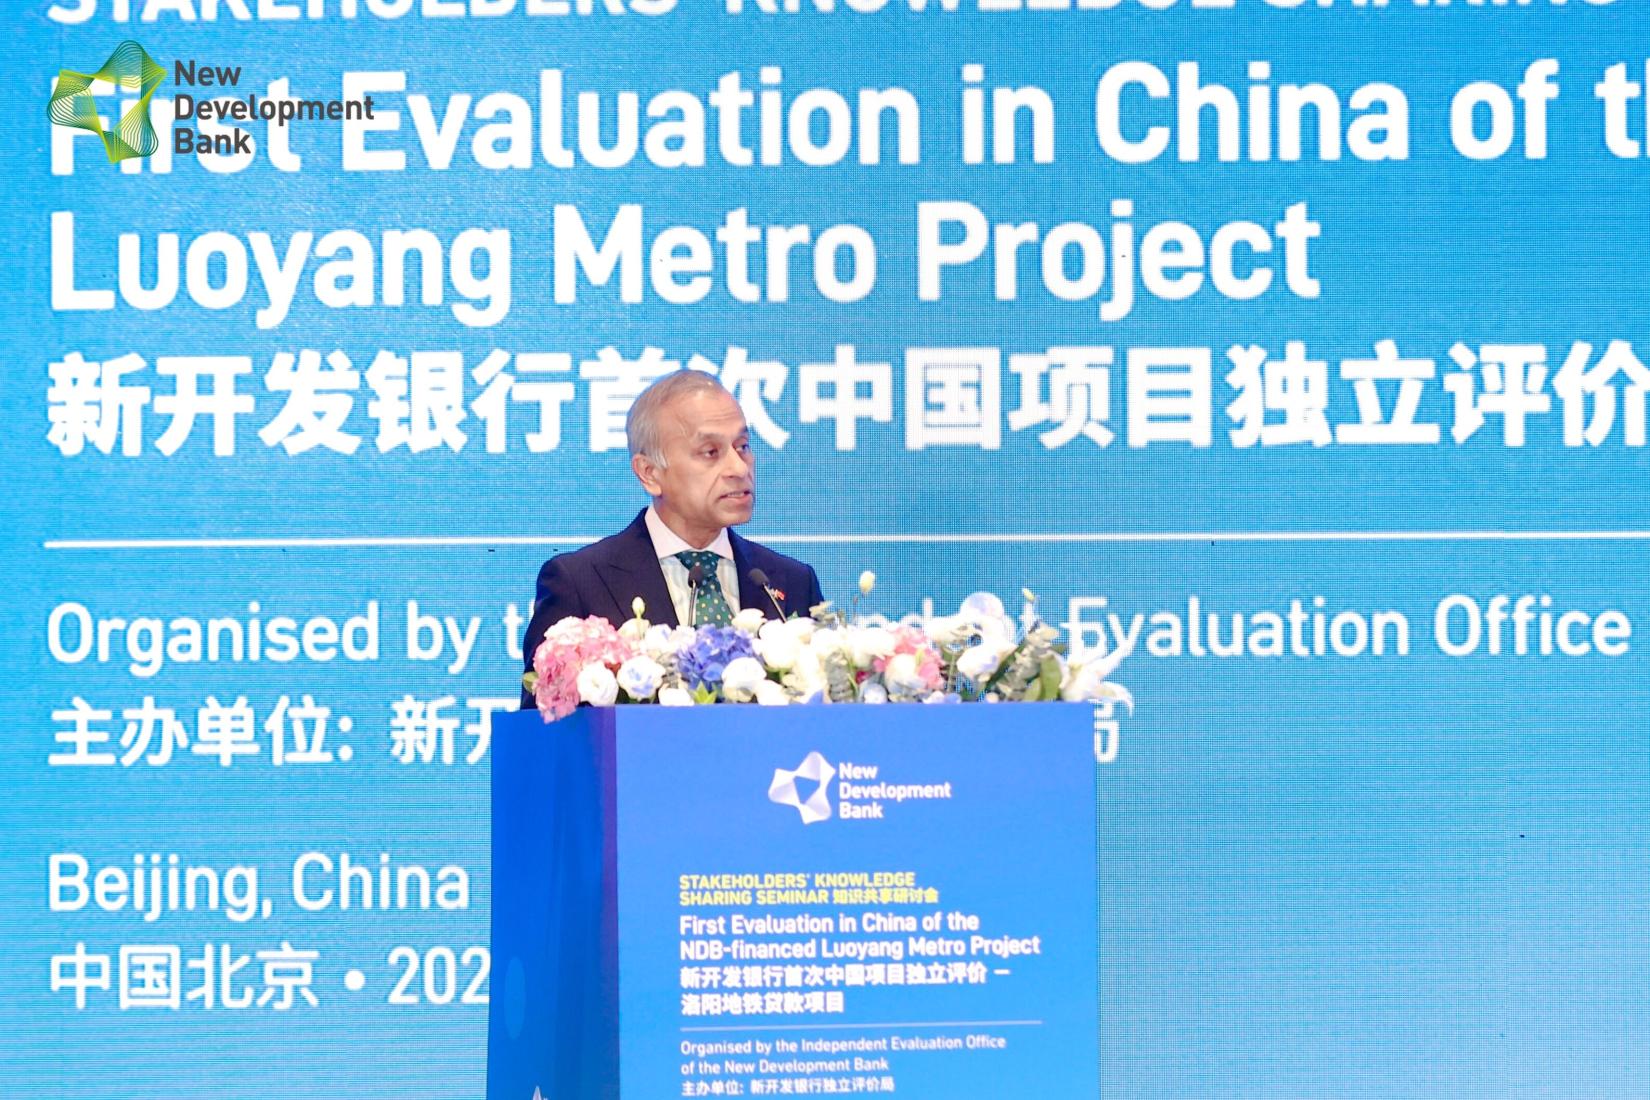 UN Resident Coordinator in China Siddharth Chatterjee at the First Evaluation in China of the NDB-financed Luoyang Metro Project